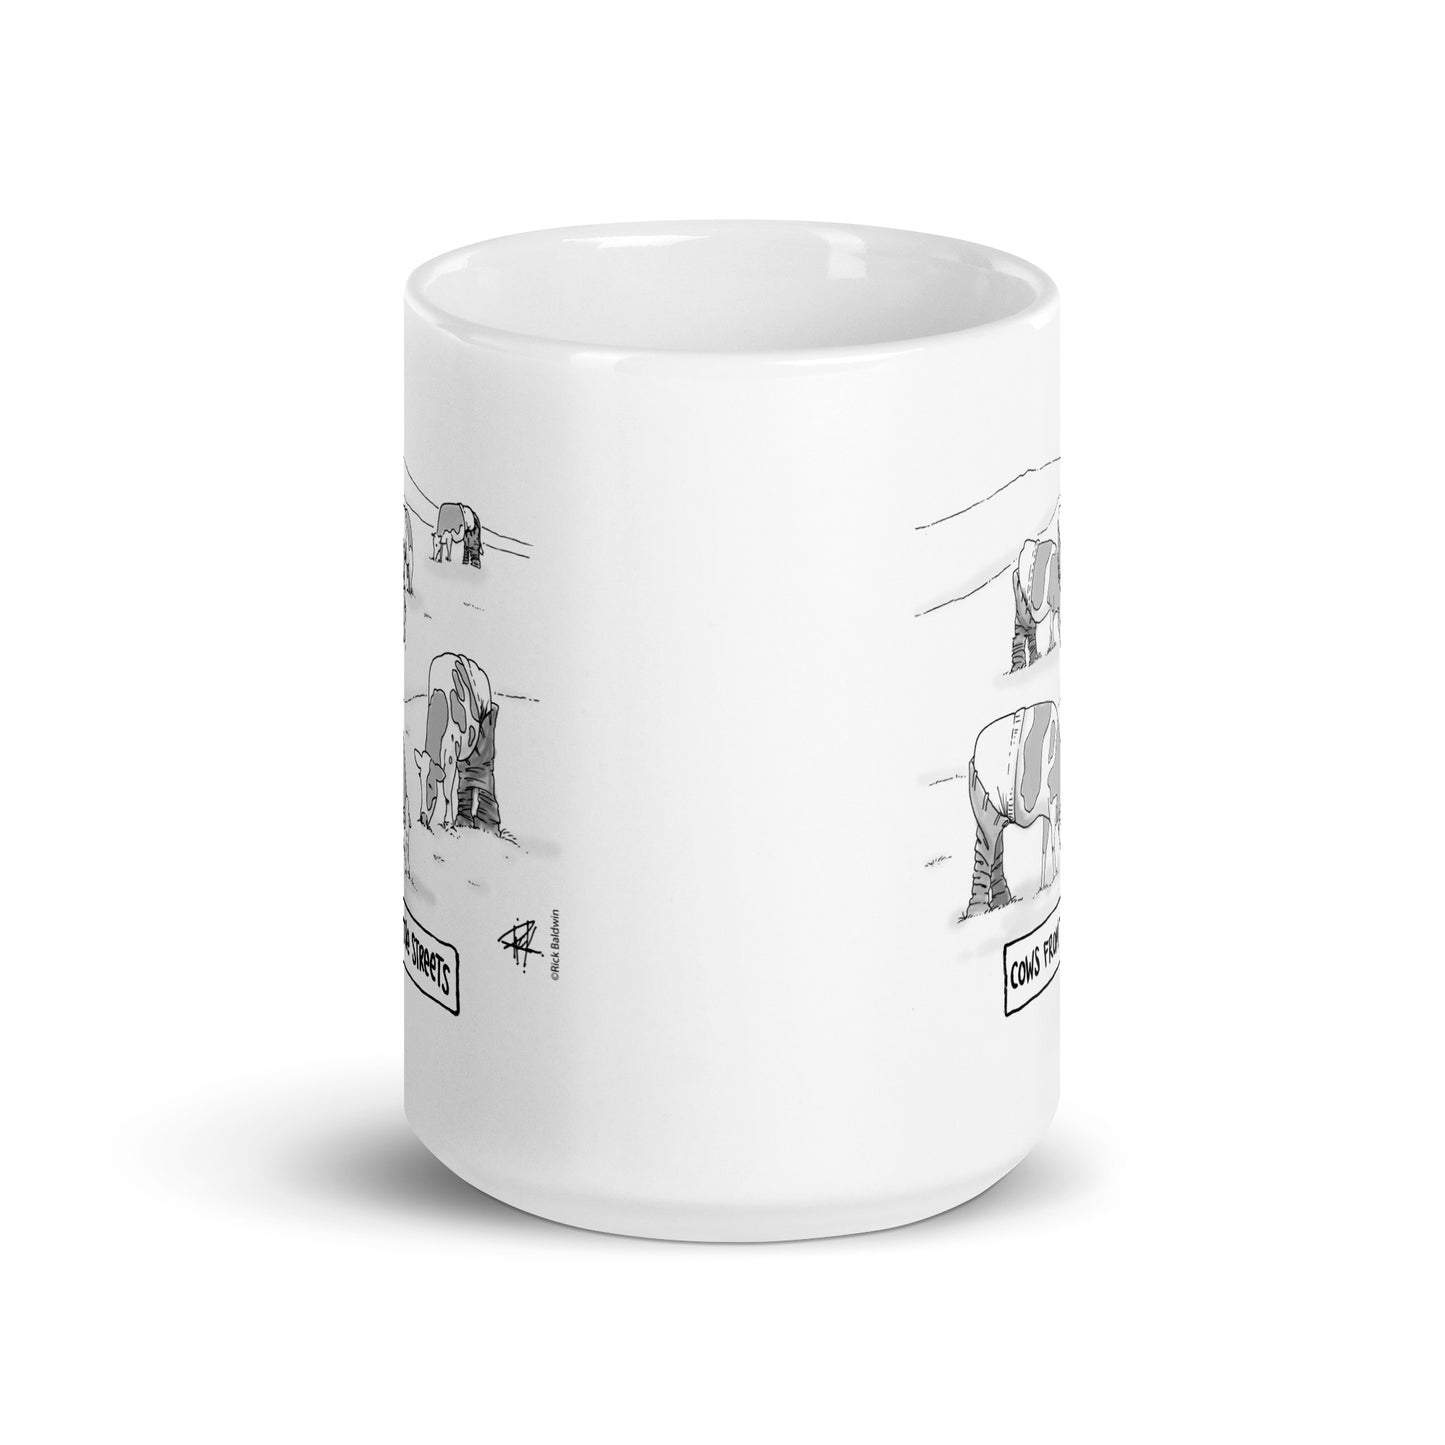 Cows From The Street - White Glossy Mug